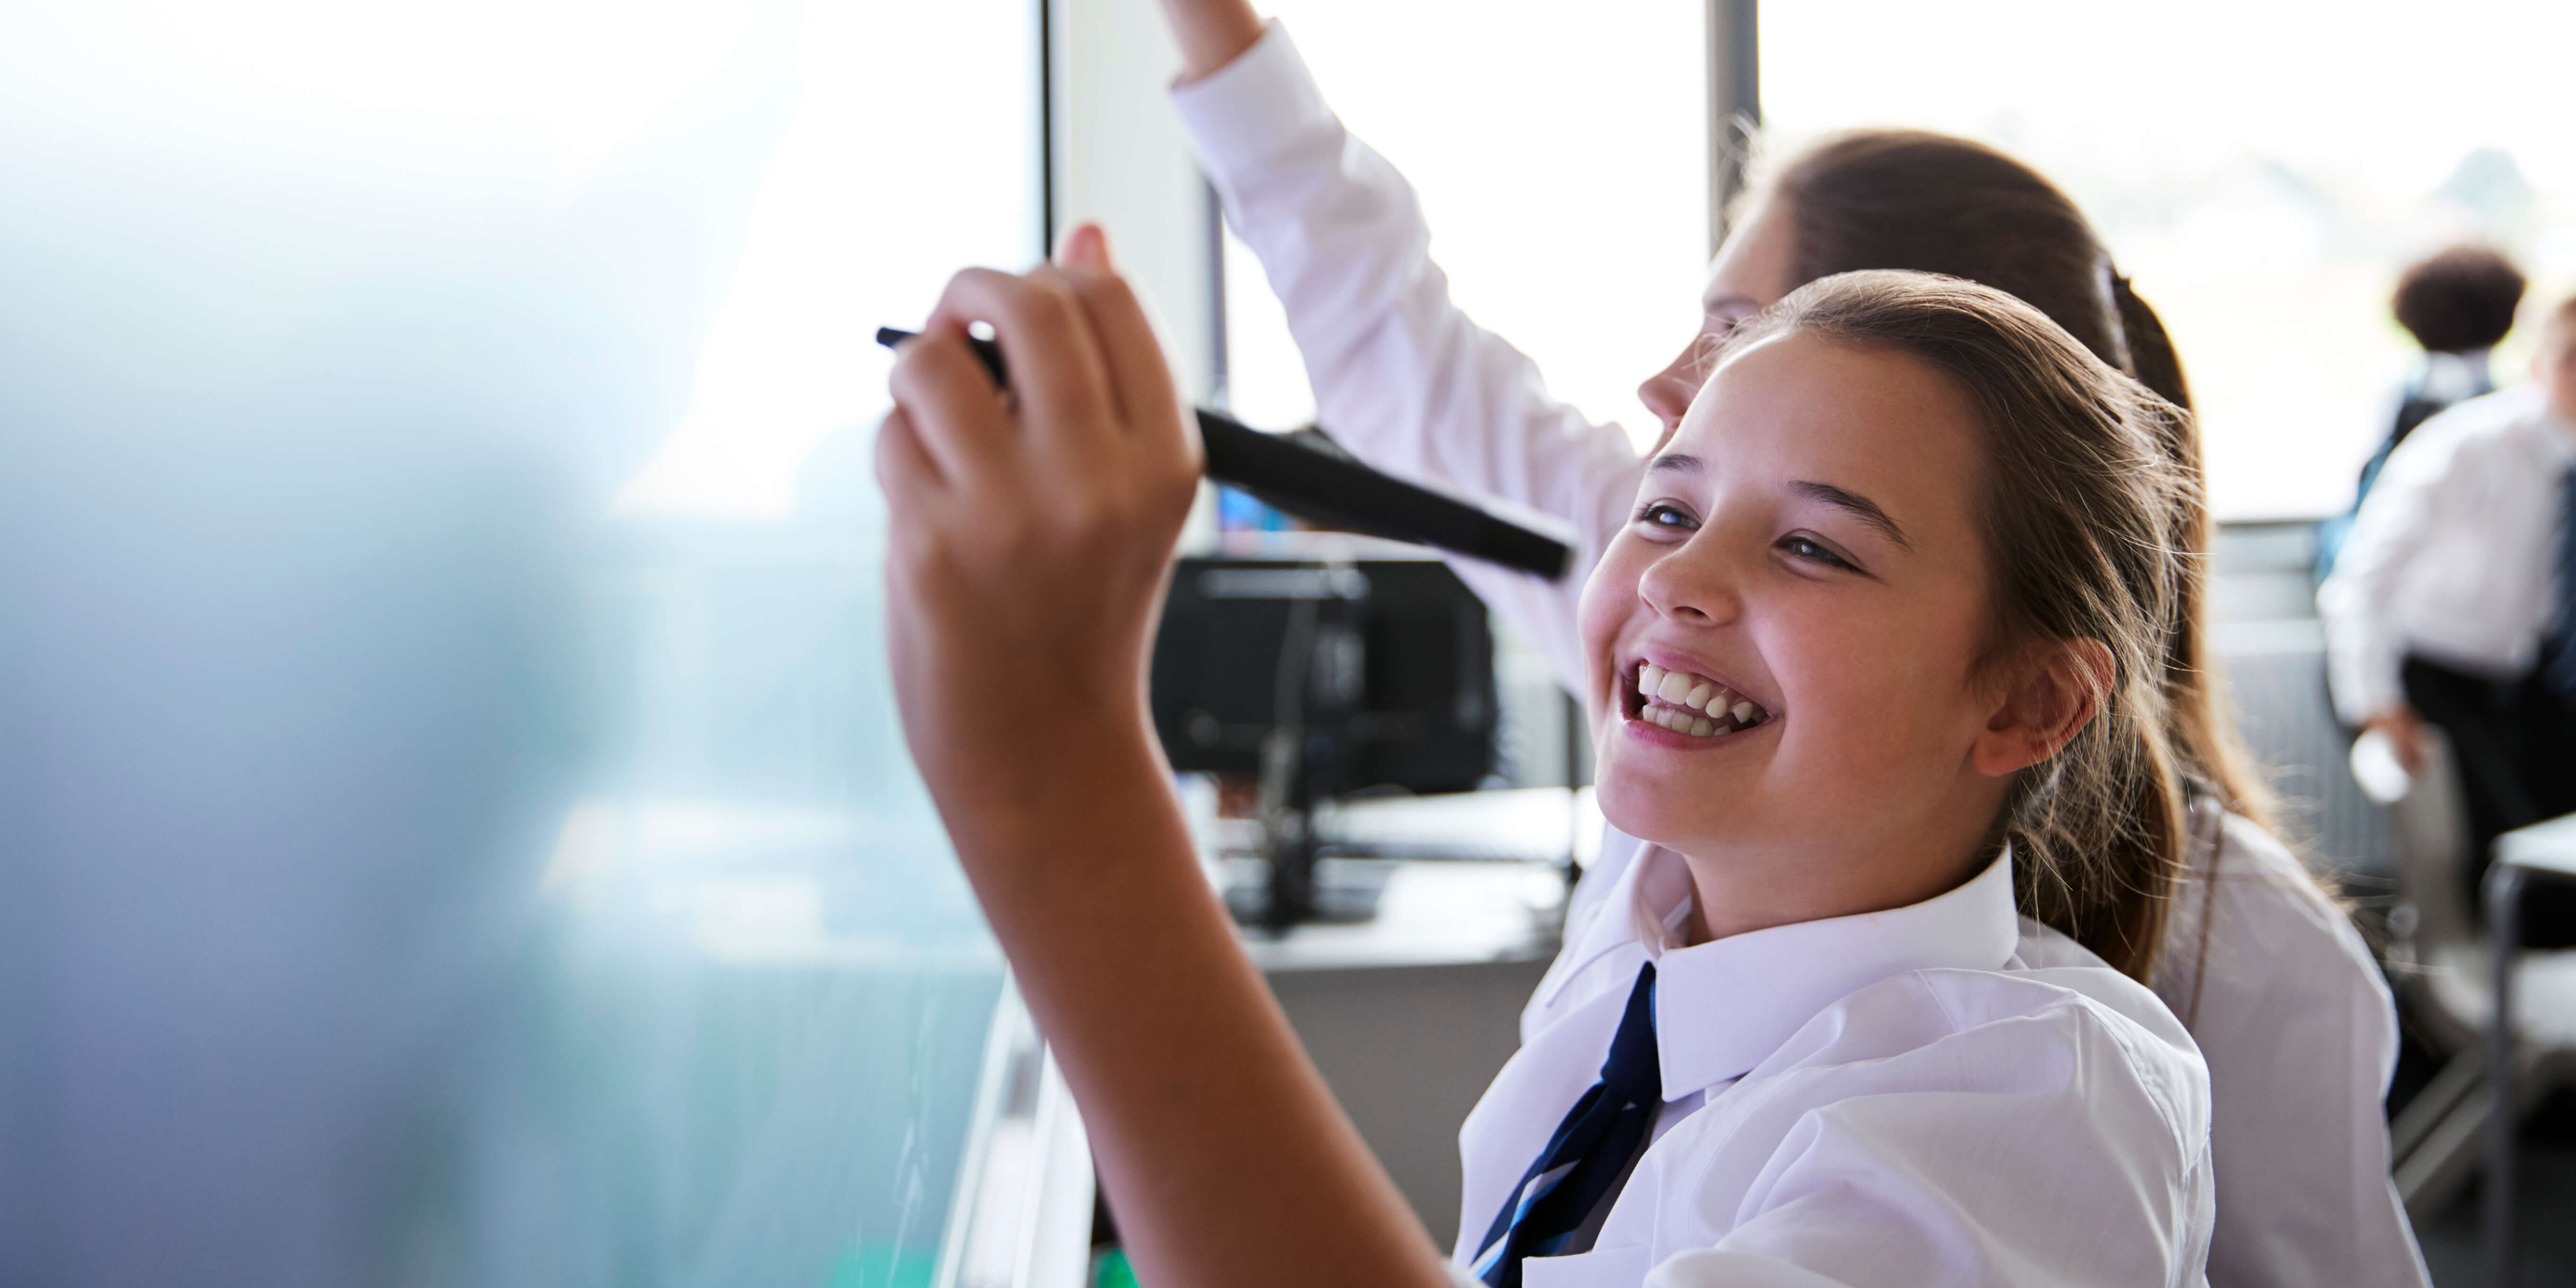 Close up of a girl in school uniform smiling as she writes on an interactive whiteboard